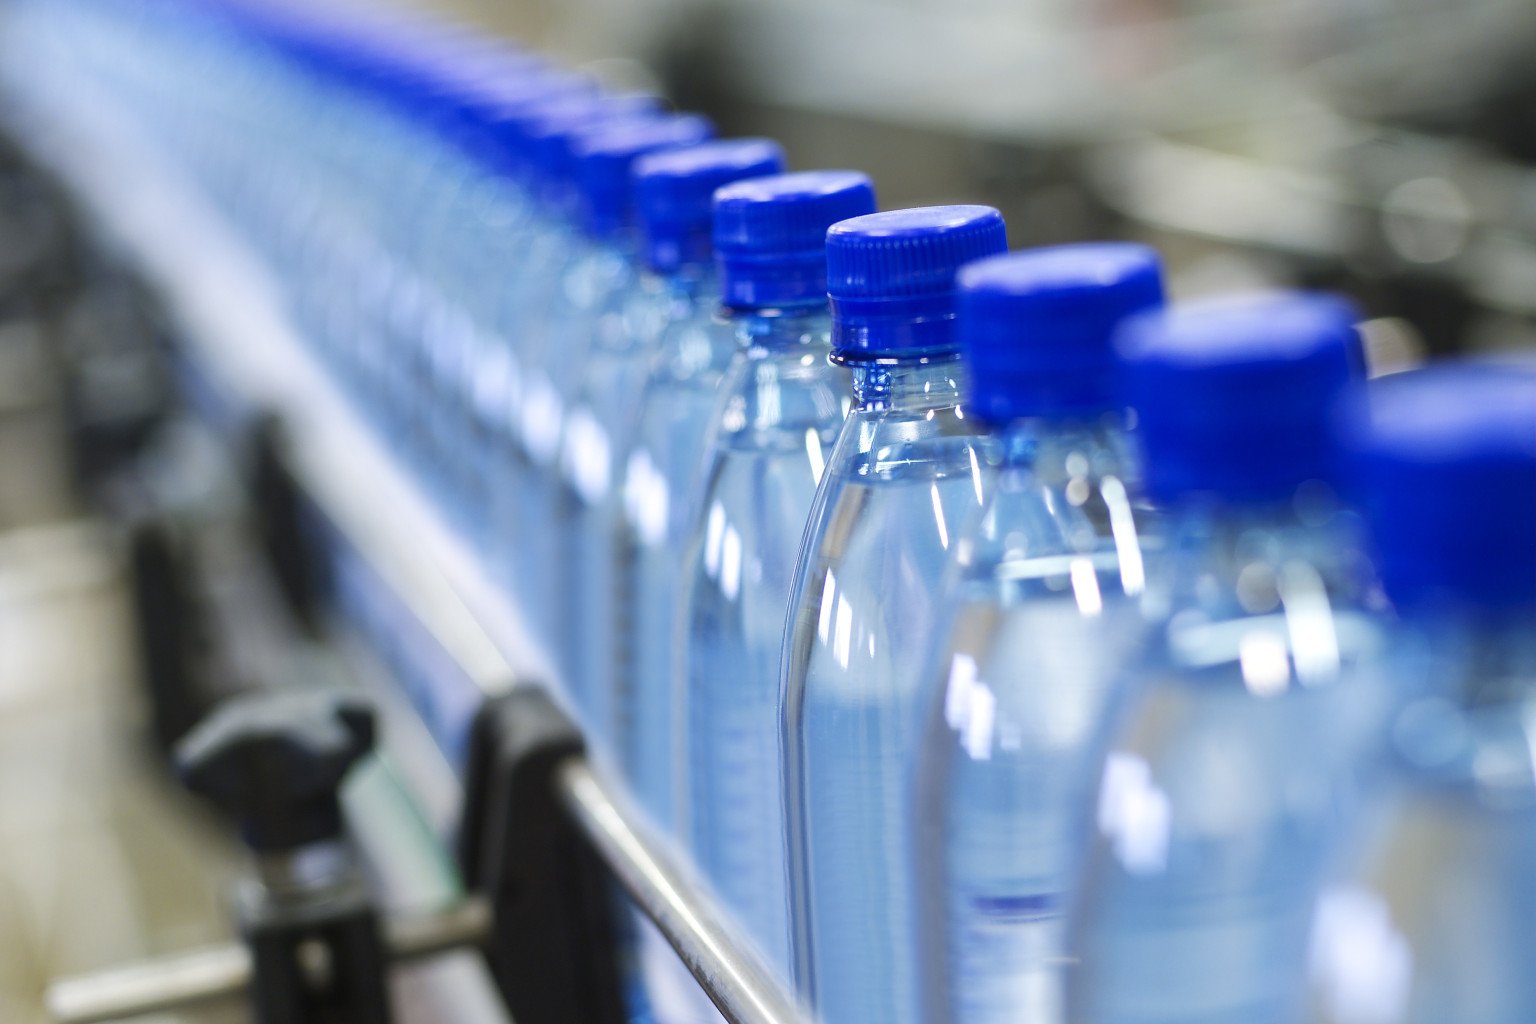 FSSAI Plans To Go With Their Proposal Of Allowing Dangerous Bromate In Packaged Water